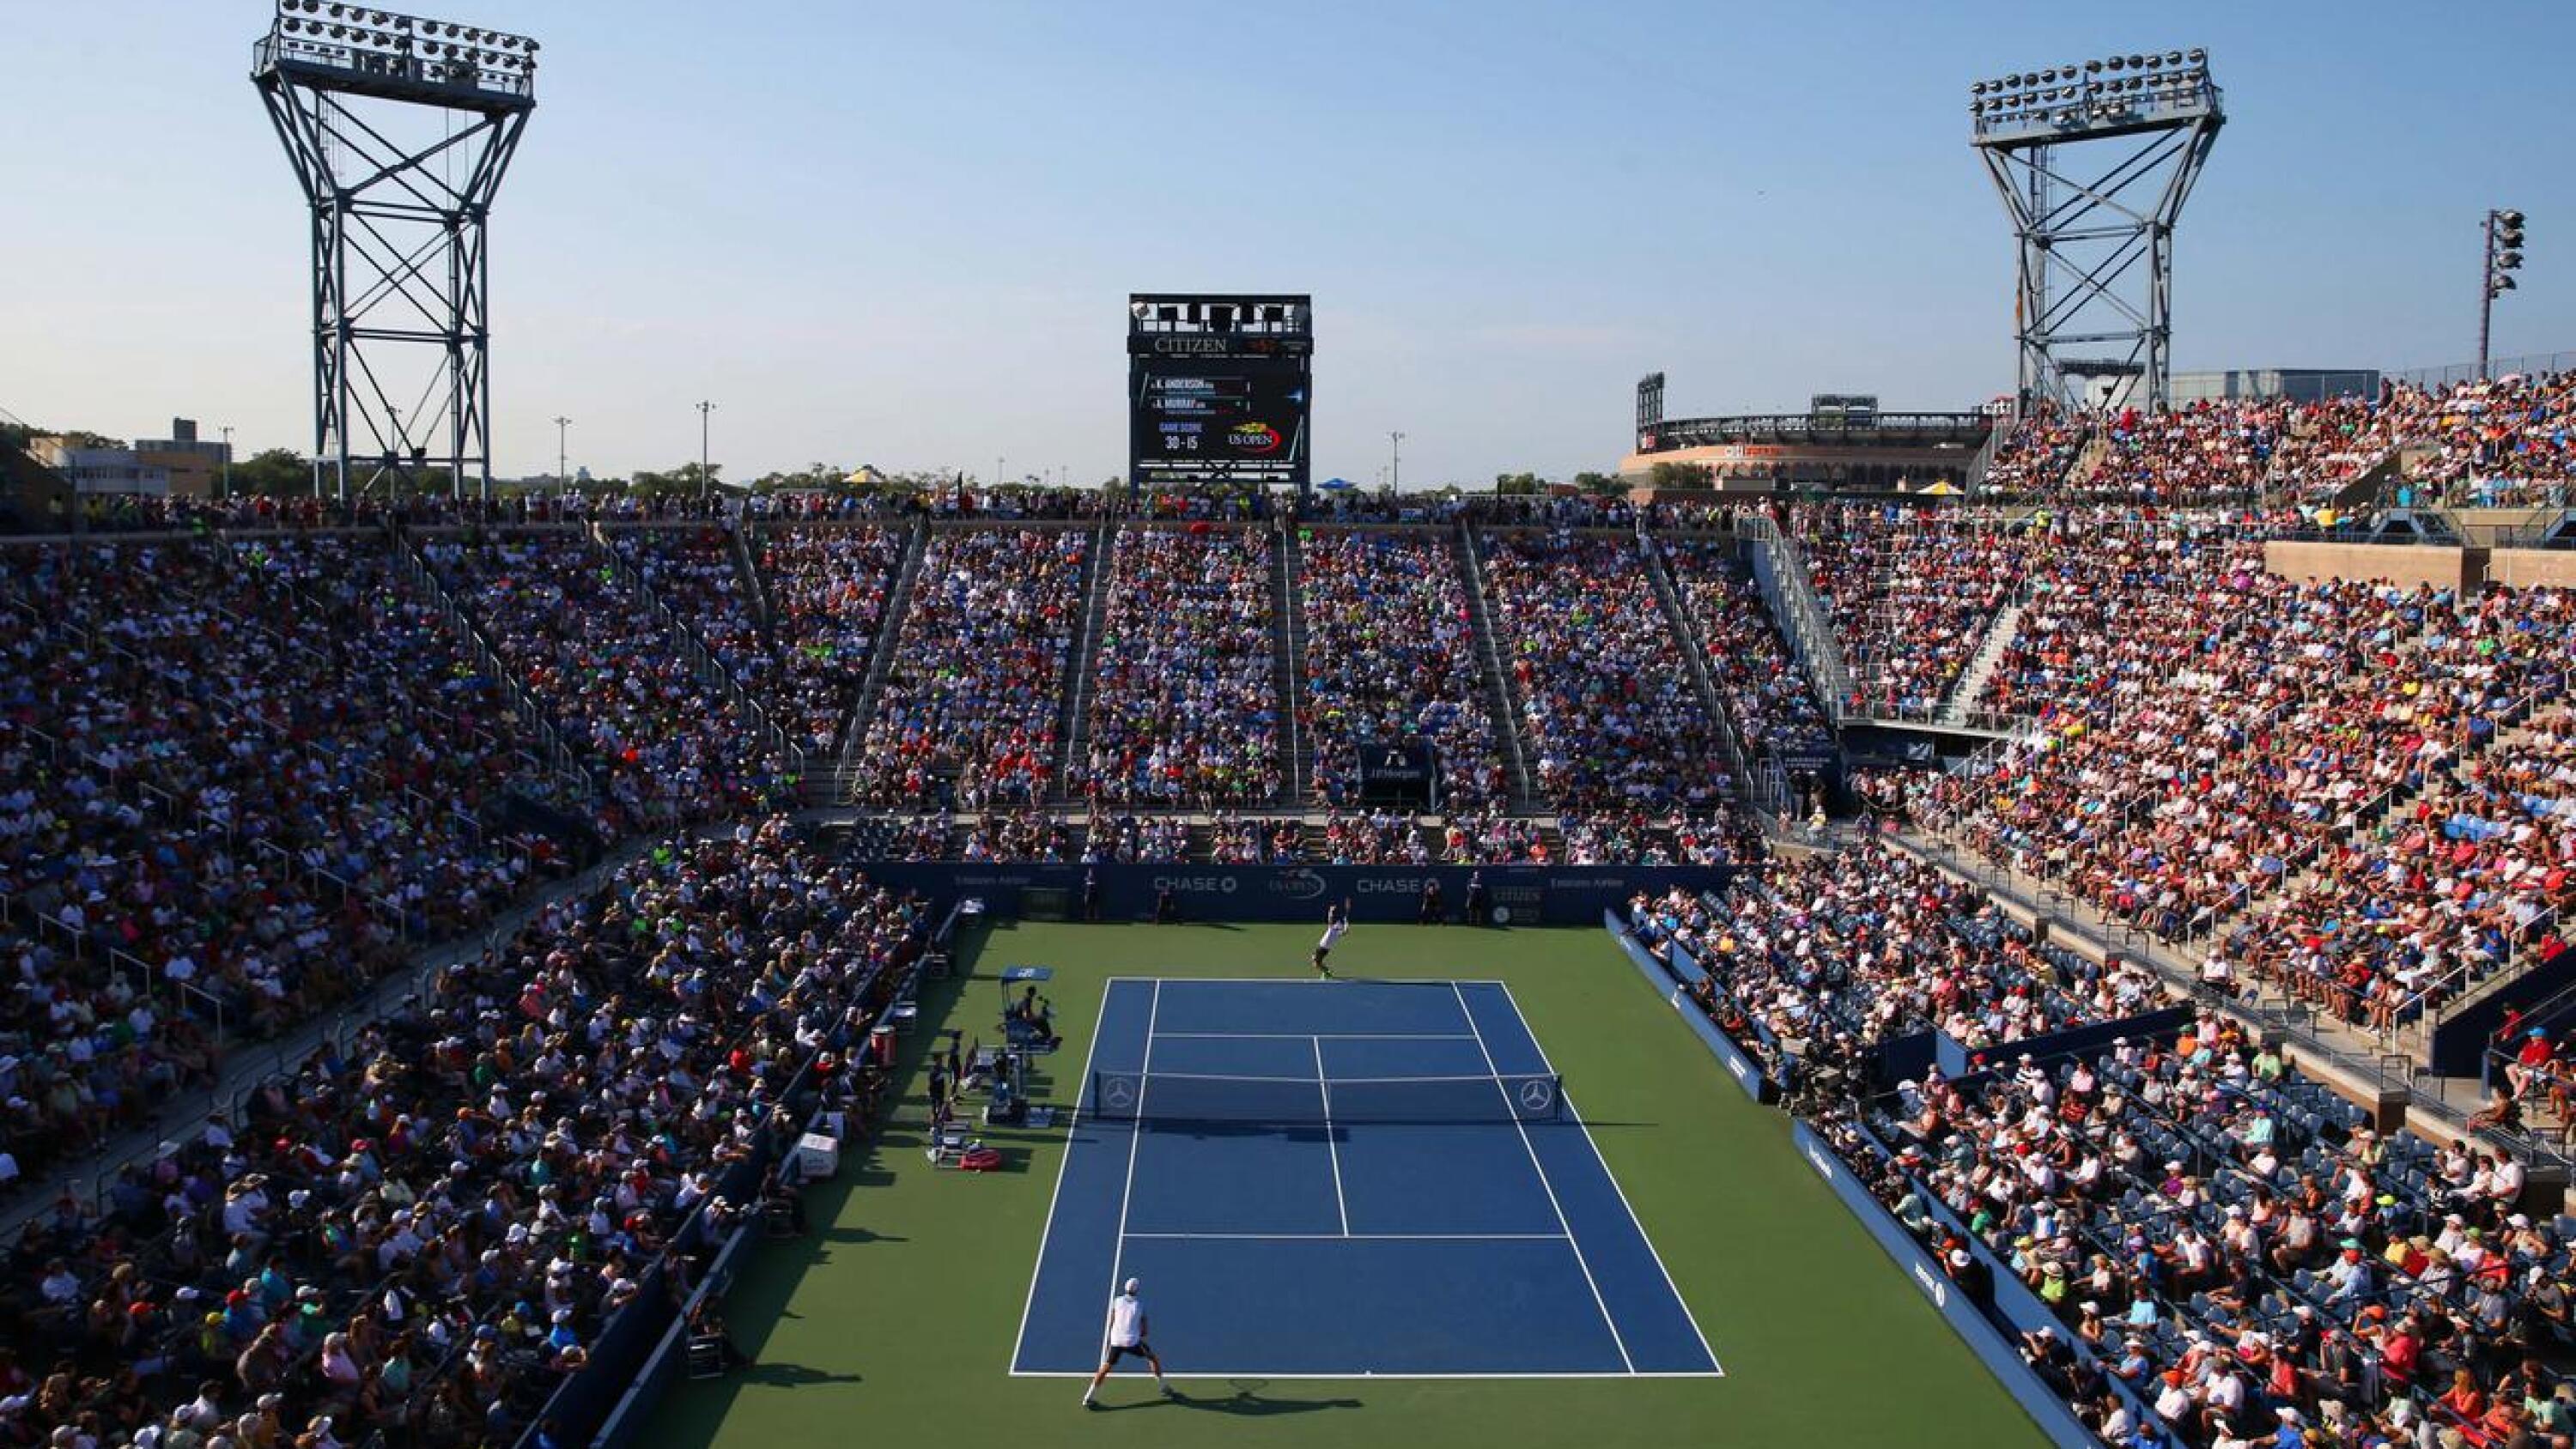 The Armstrong Stadium during the US Open tennis match between Andy Murray of Great Britain and Kevin Anderson of South Africa in 2015